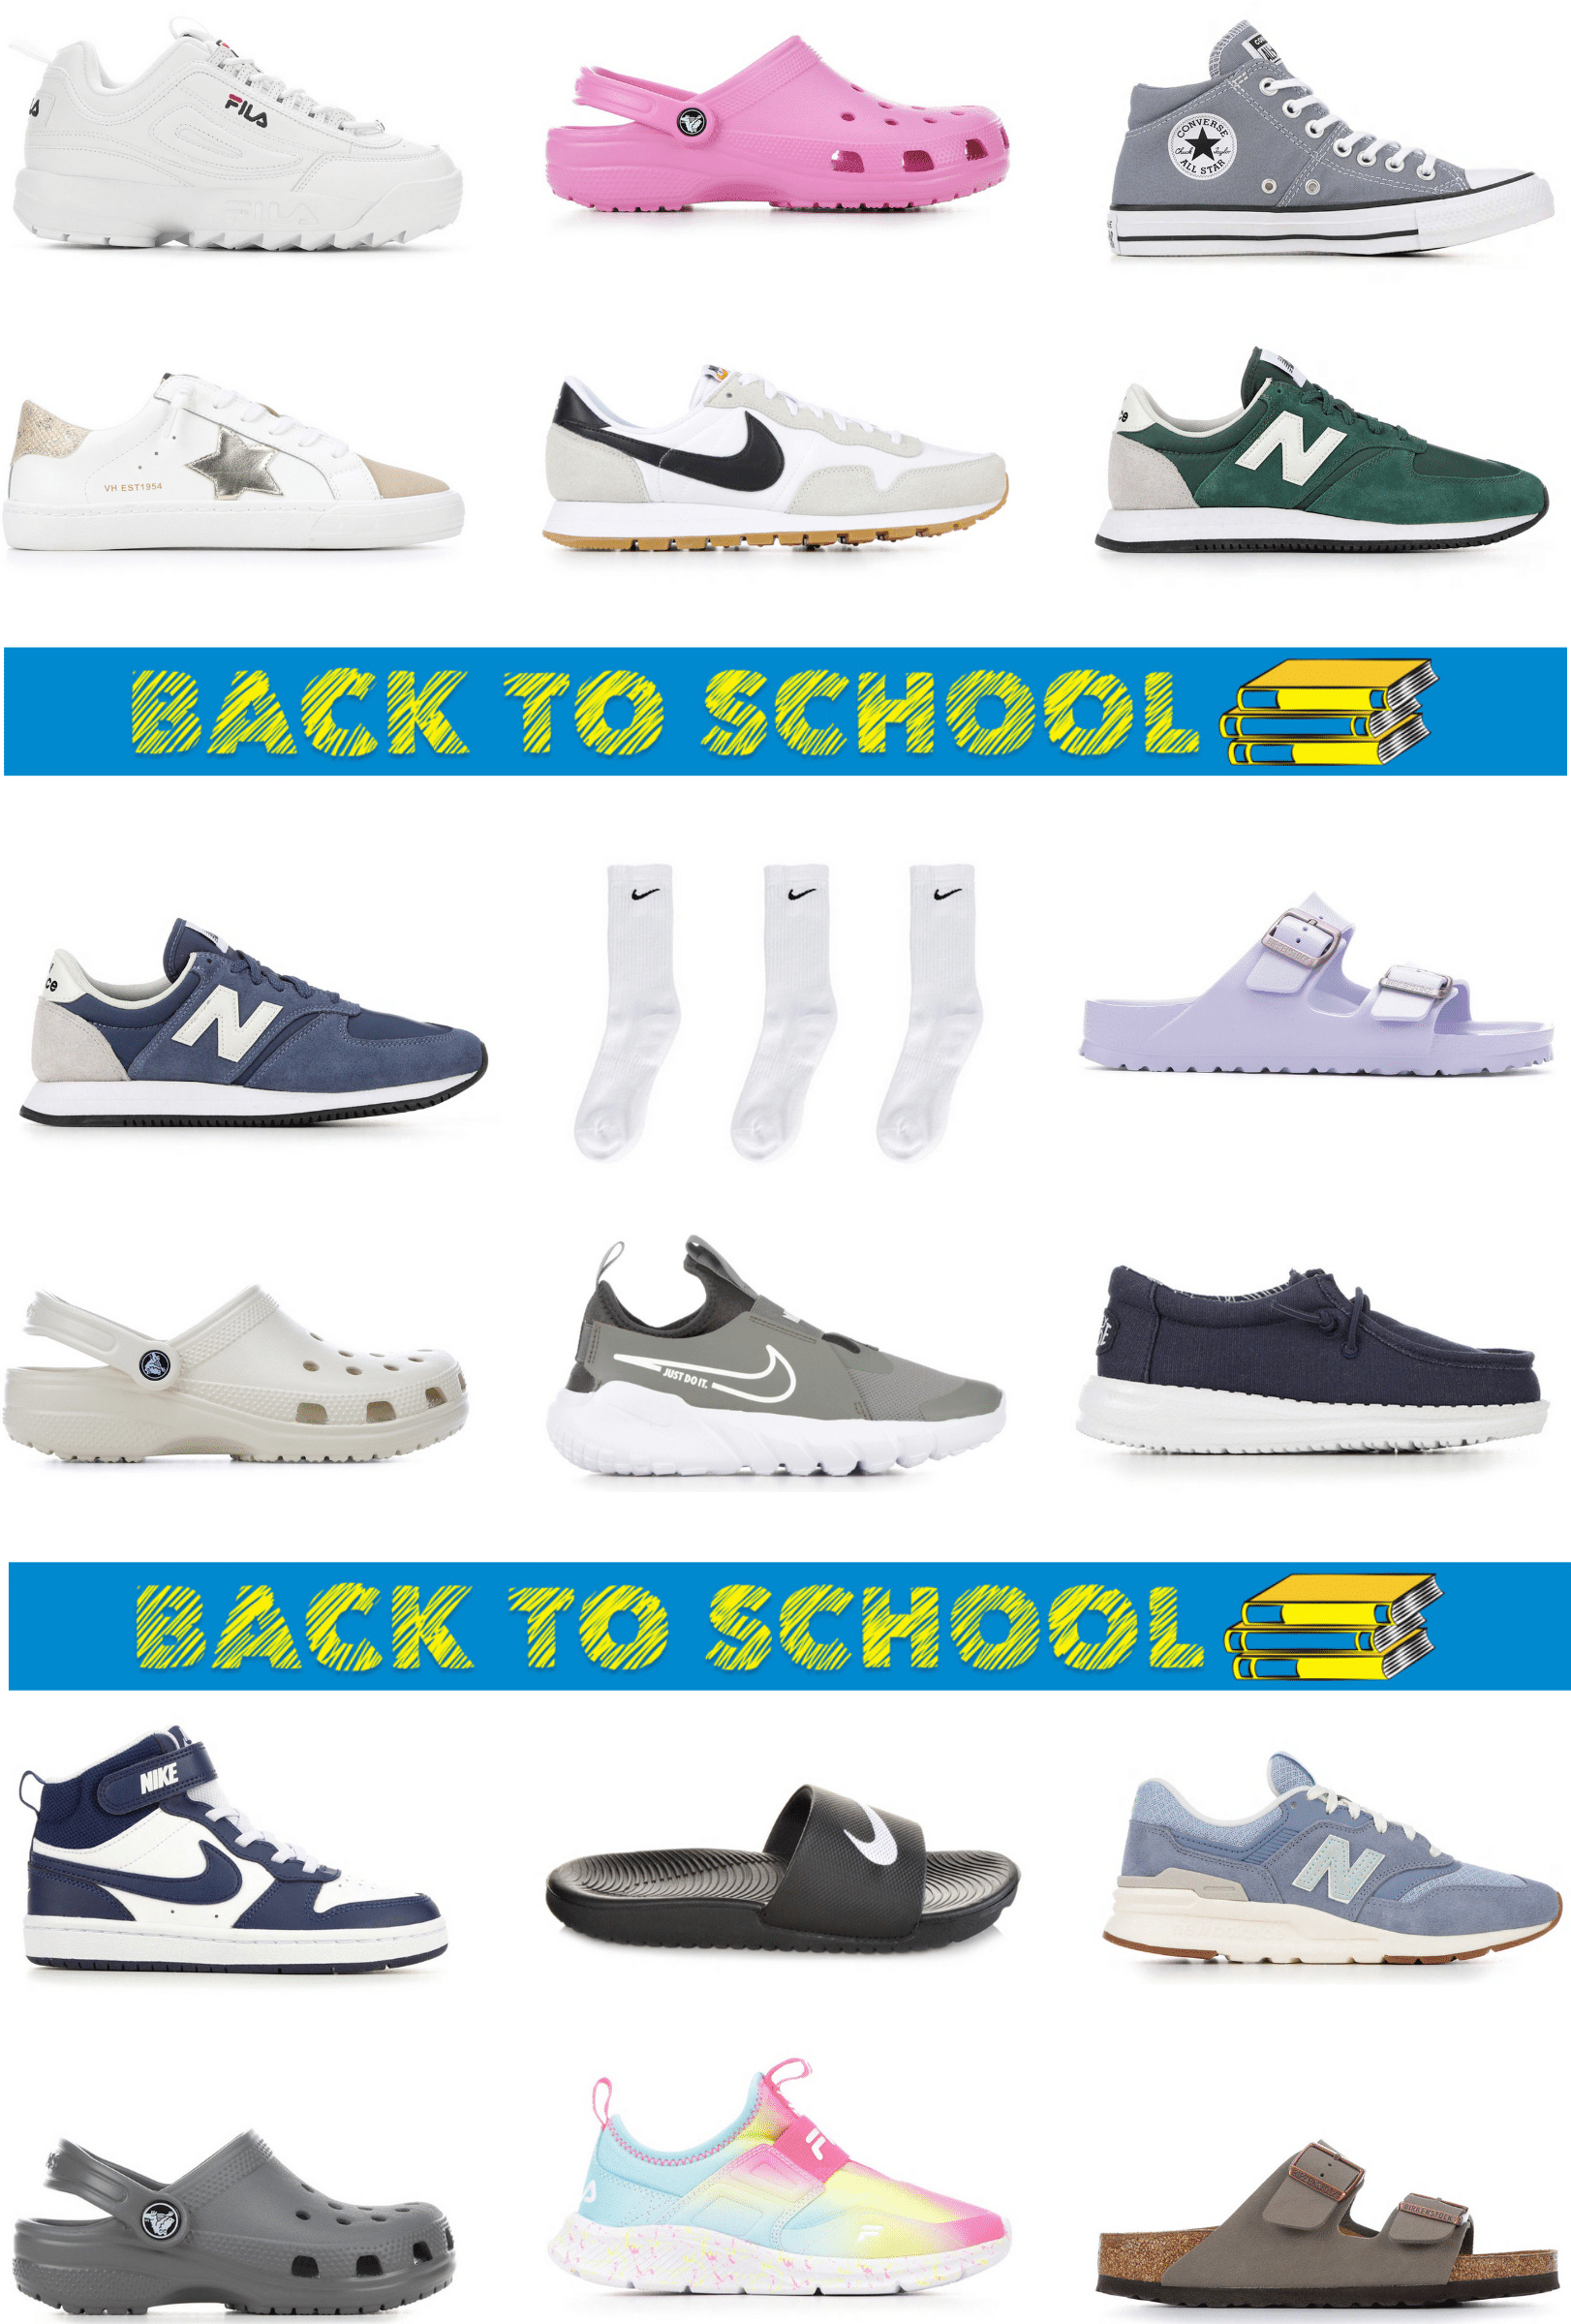 The Best Nike Shoes for Back to School.